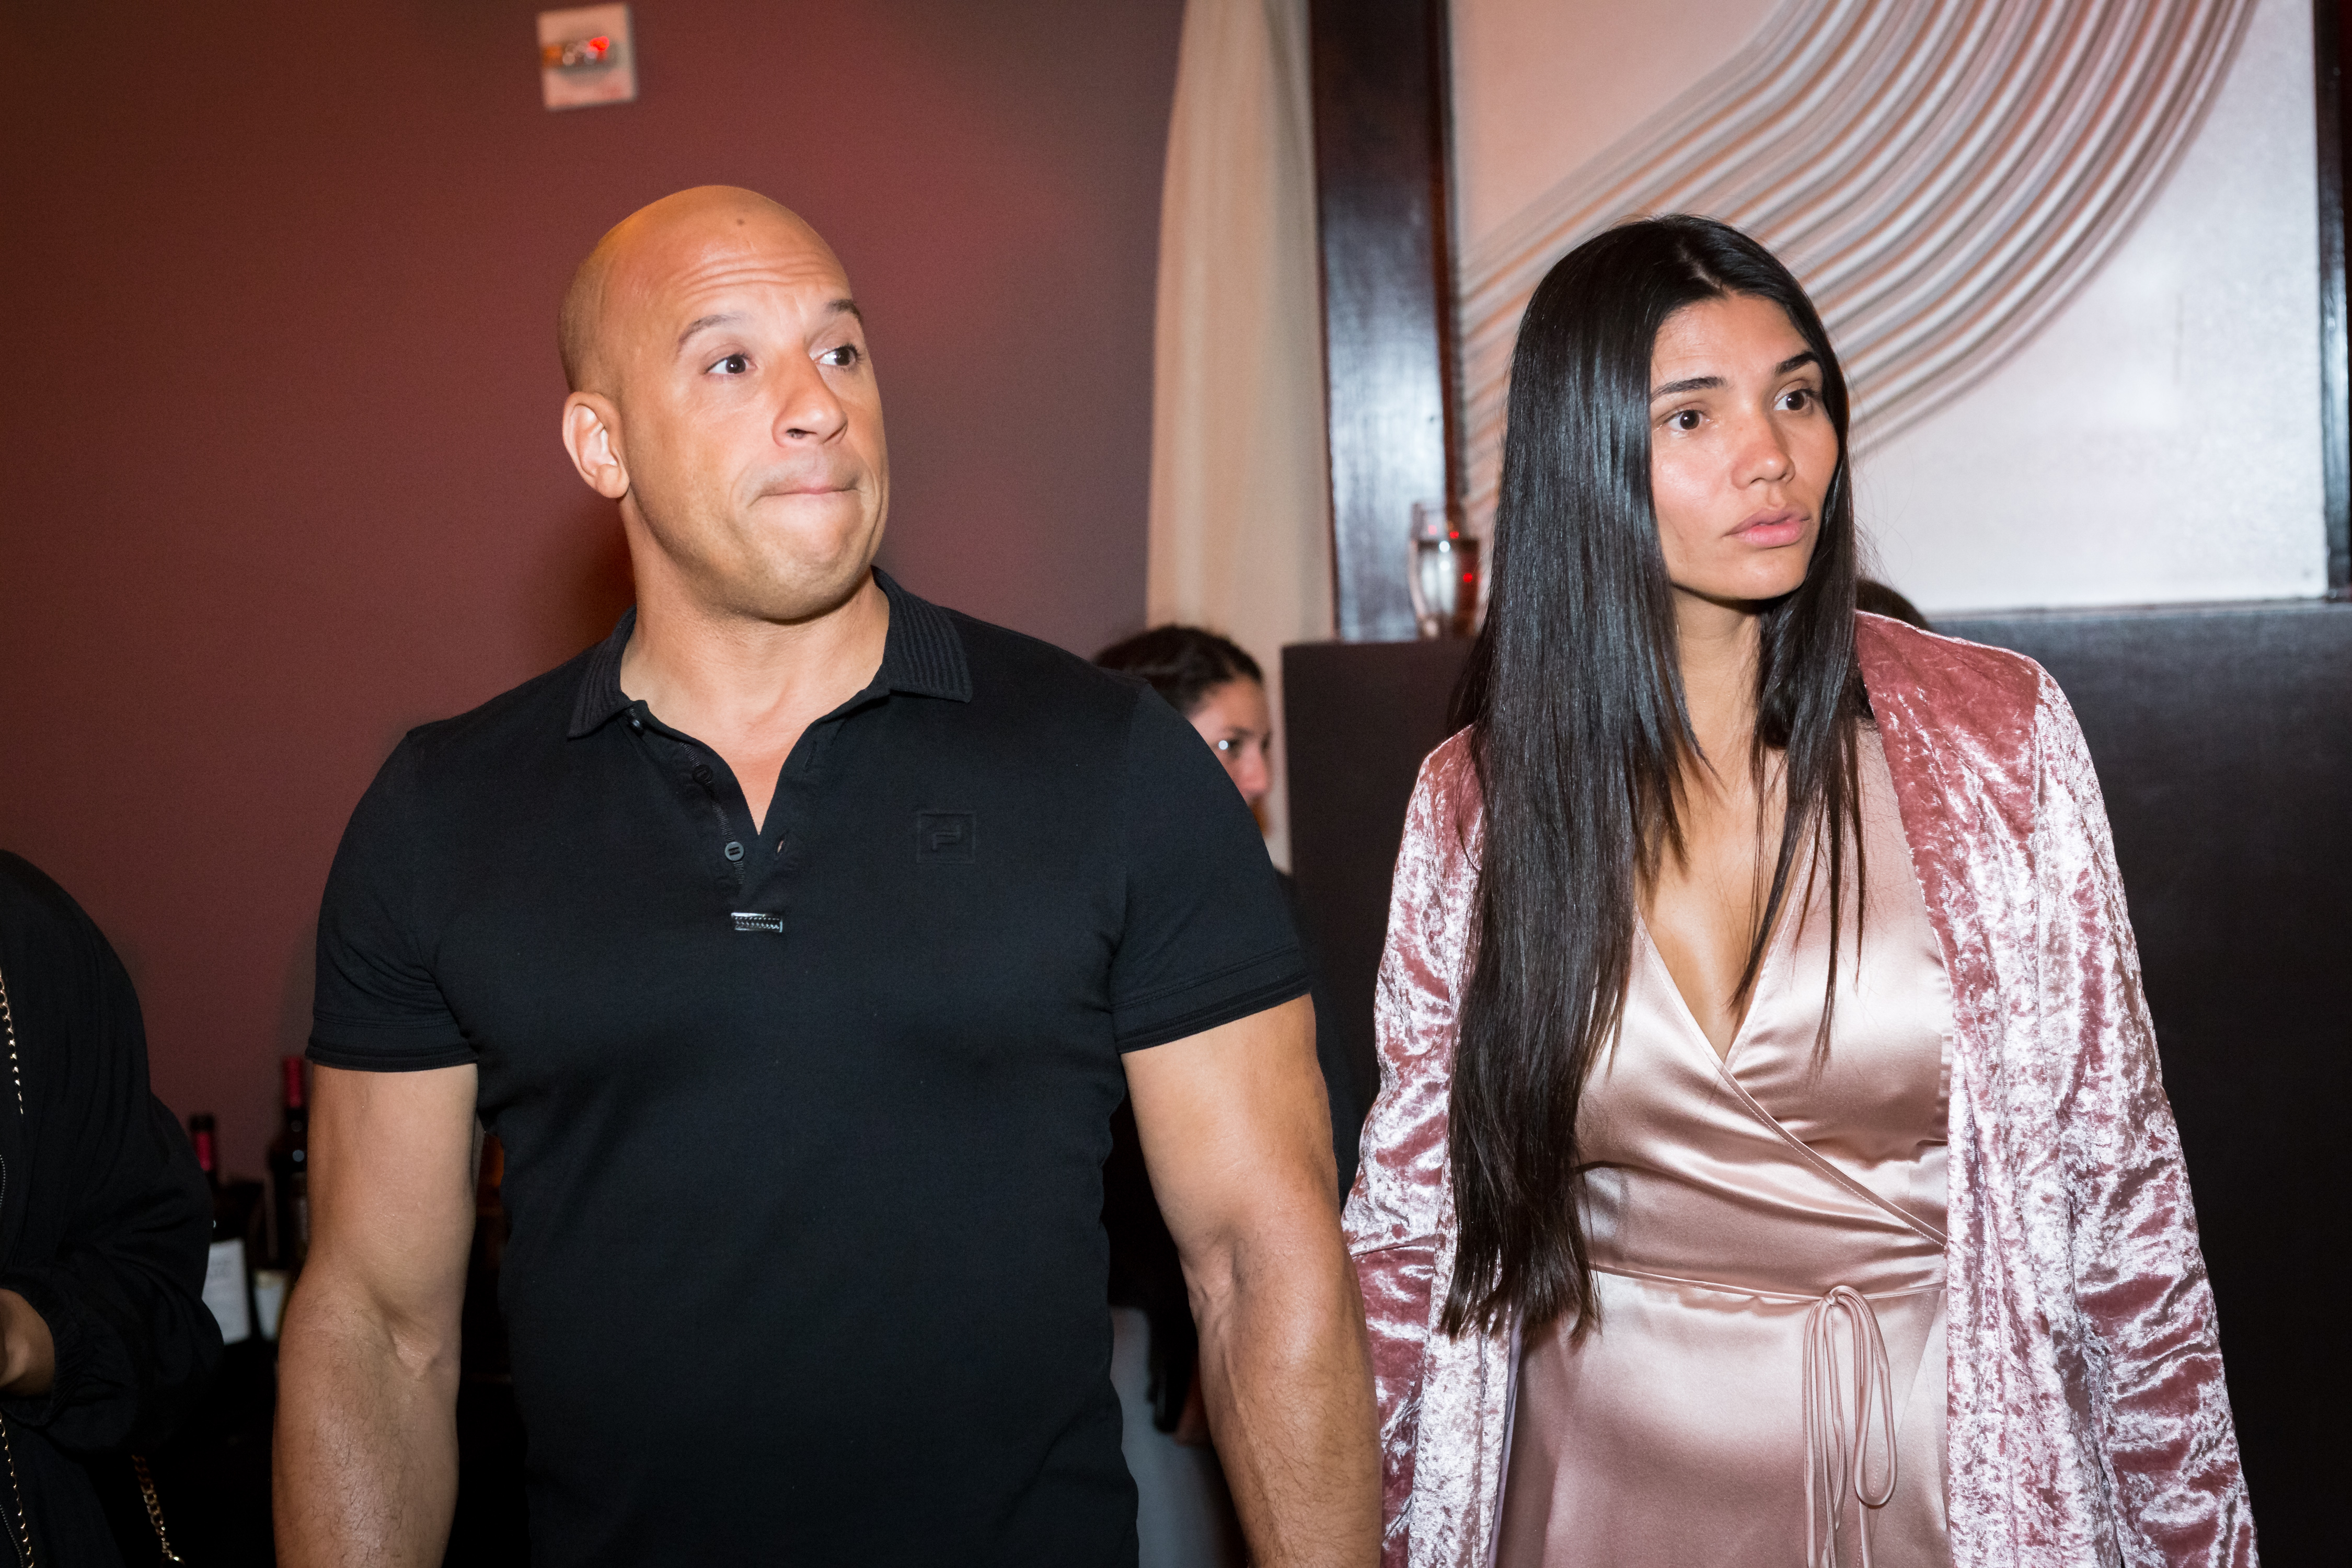 Vin Diesel and his partner Paloma Jiménez pictured together at the 2017 Latino Media Awards